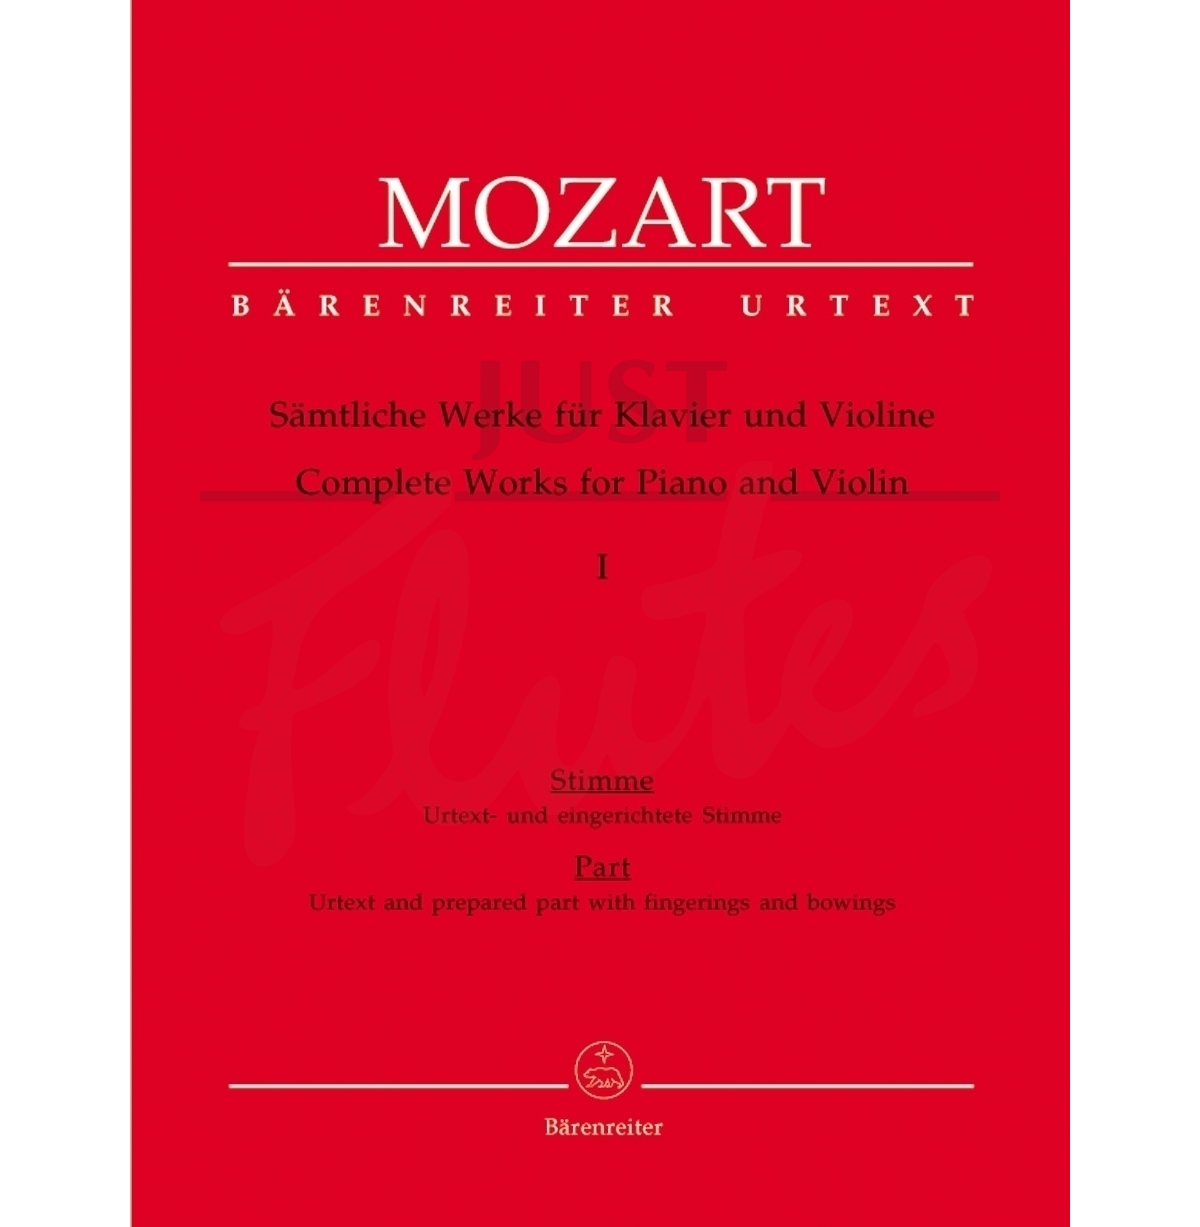 Complete Works For Violin And Piano Vol. 1